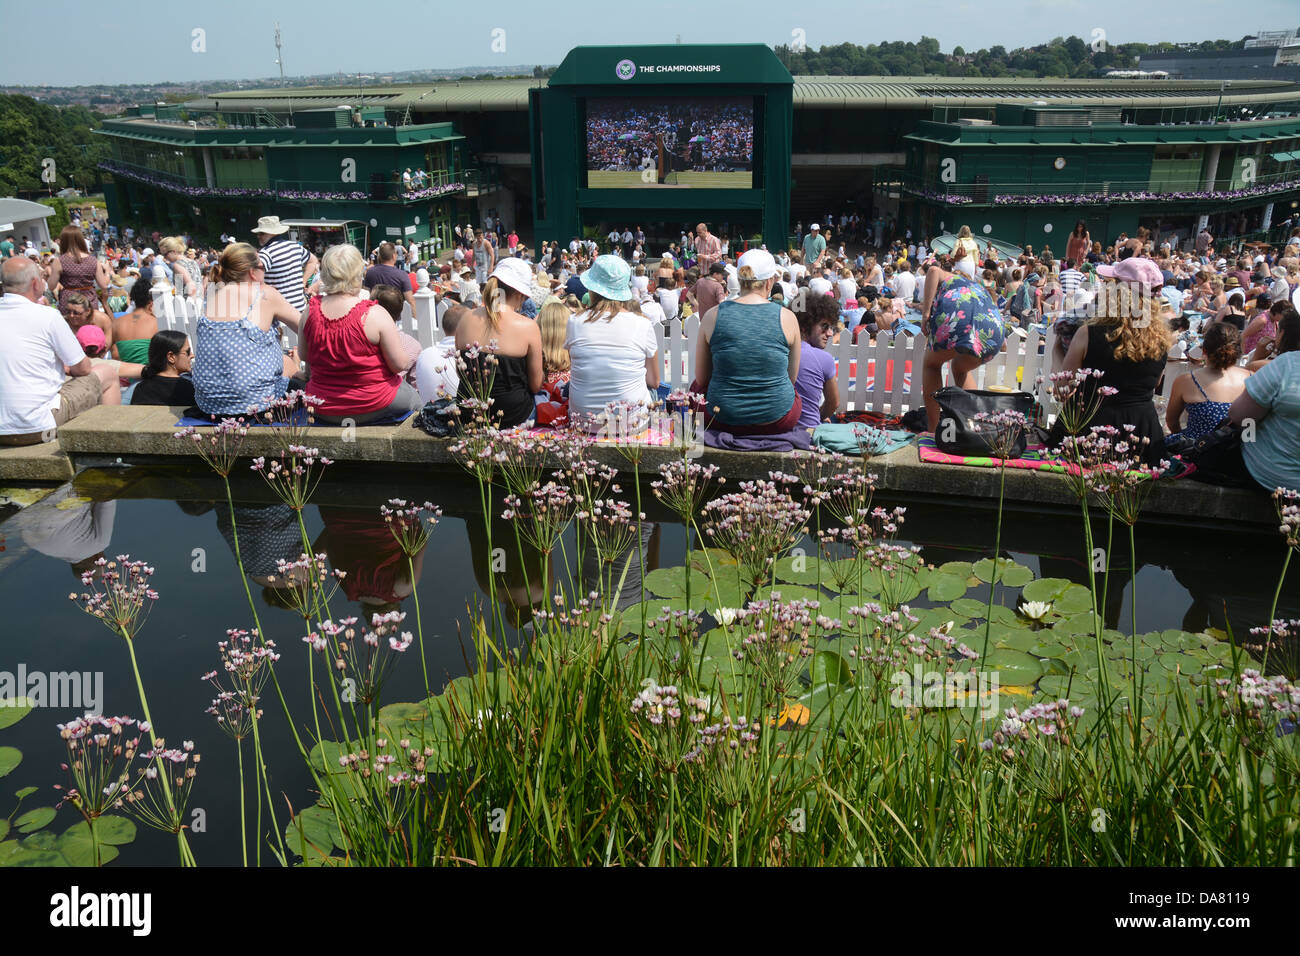 Spectators fans on Henman Hill Murray Mound watching tennis on the big screen Wimbledon with a water feature and lily pads Stock Photo